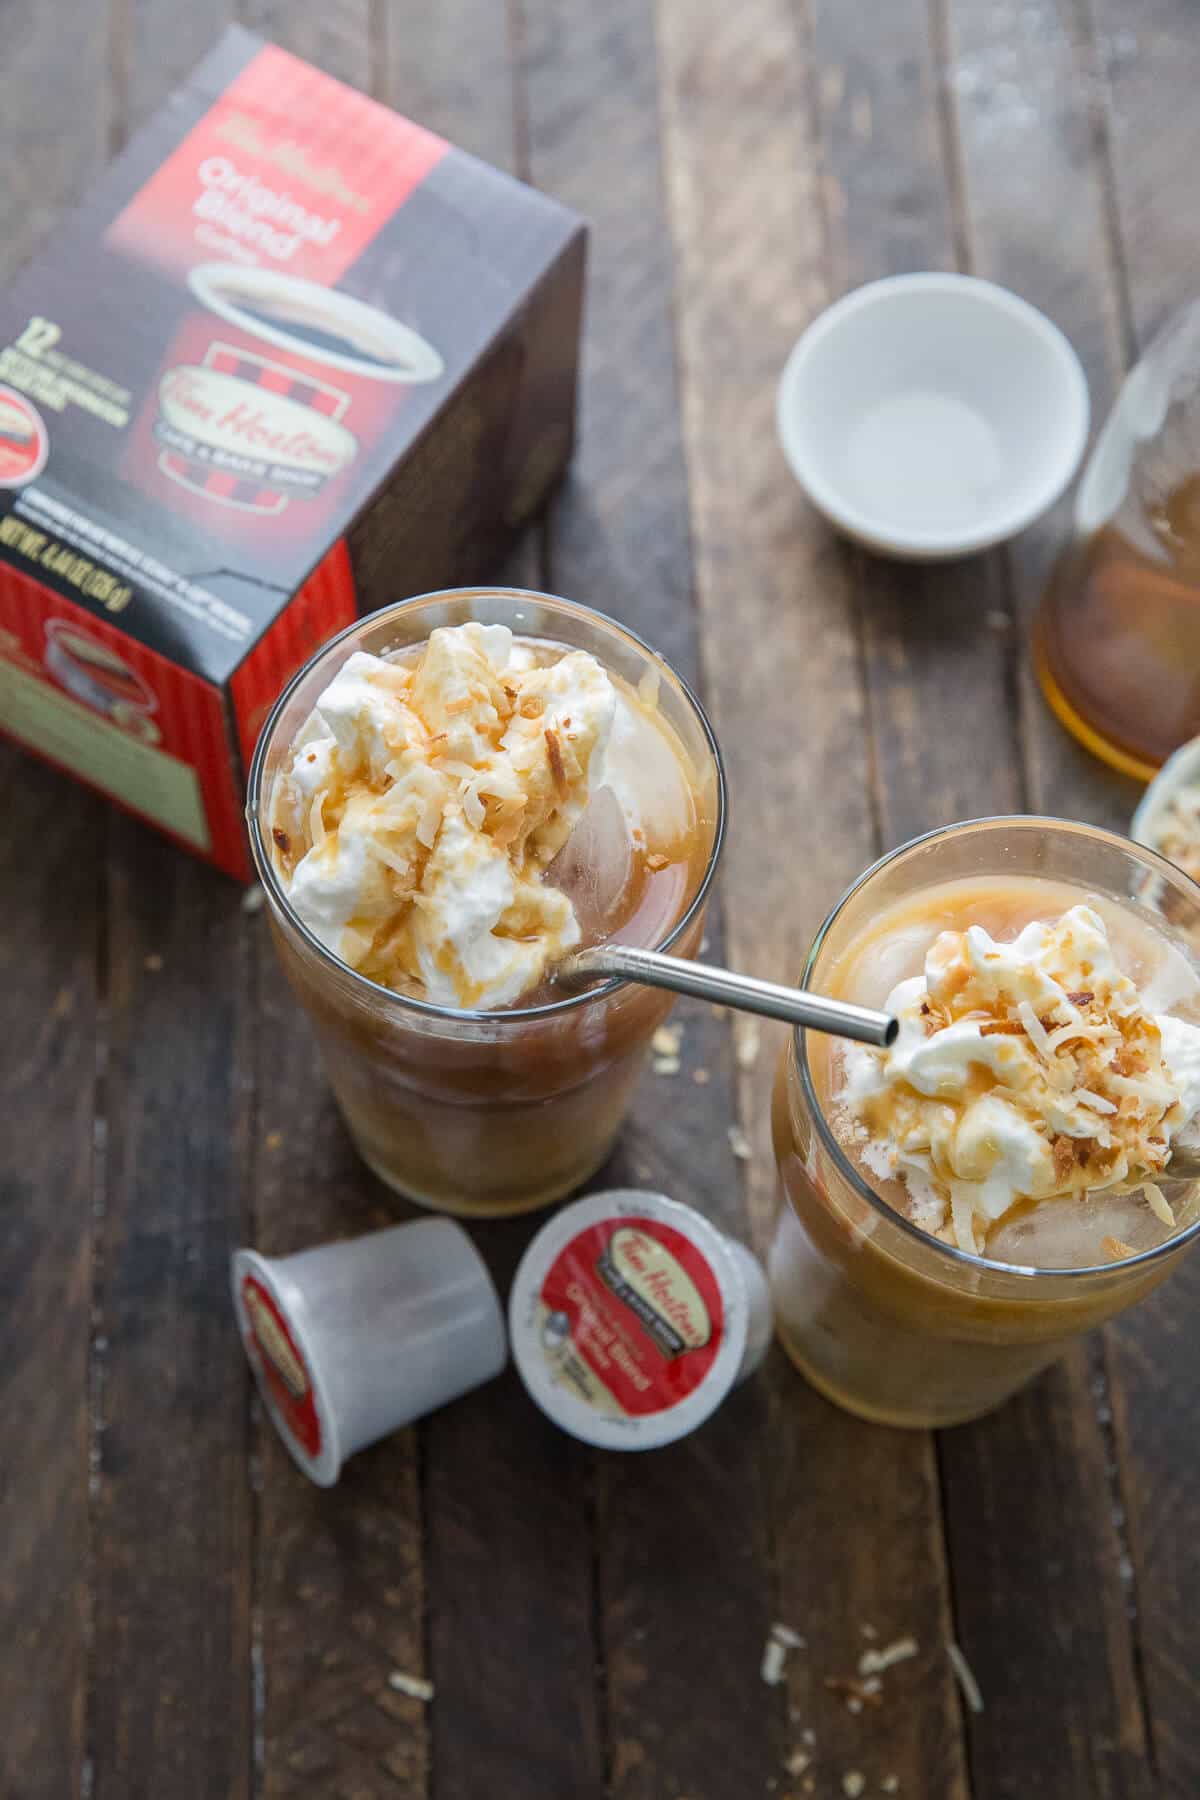 Don't buy iced macchiatos when they are easy to make at home! This coconut caramel flavor is so easy!